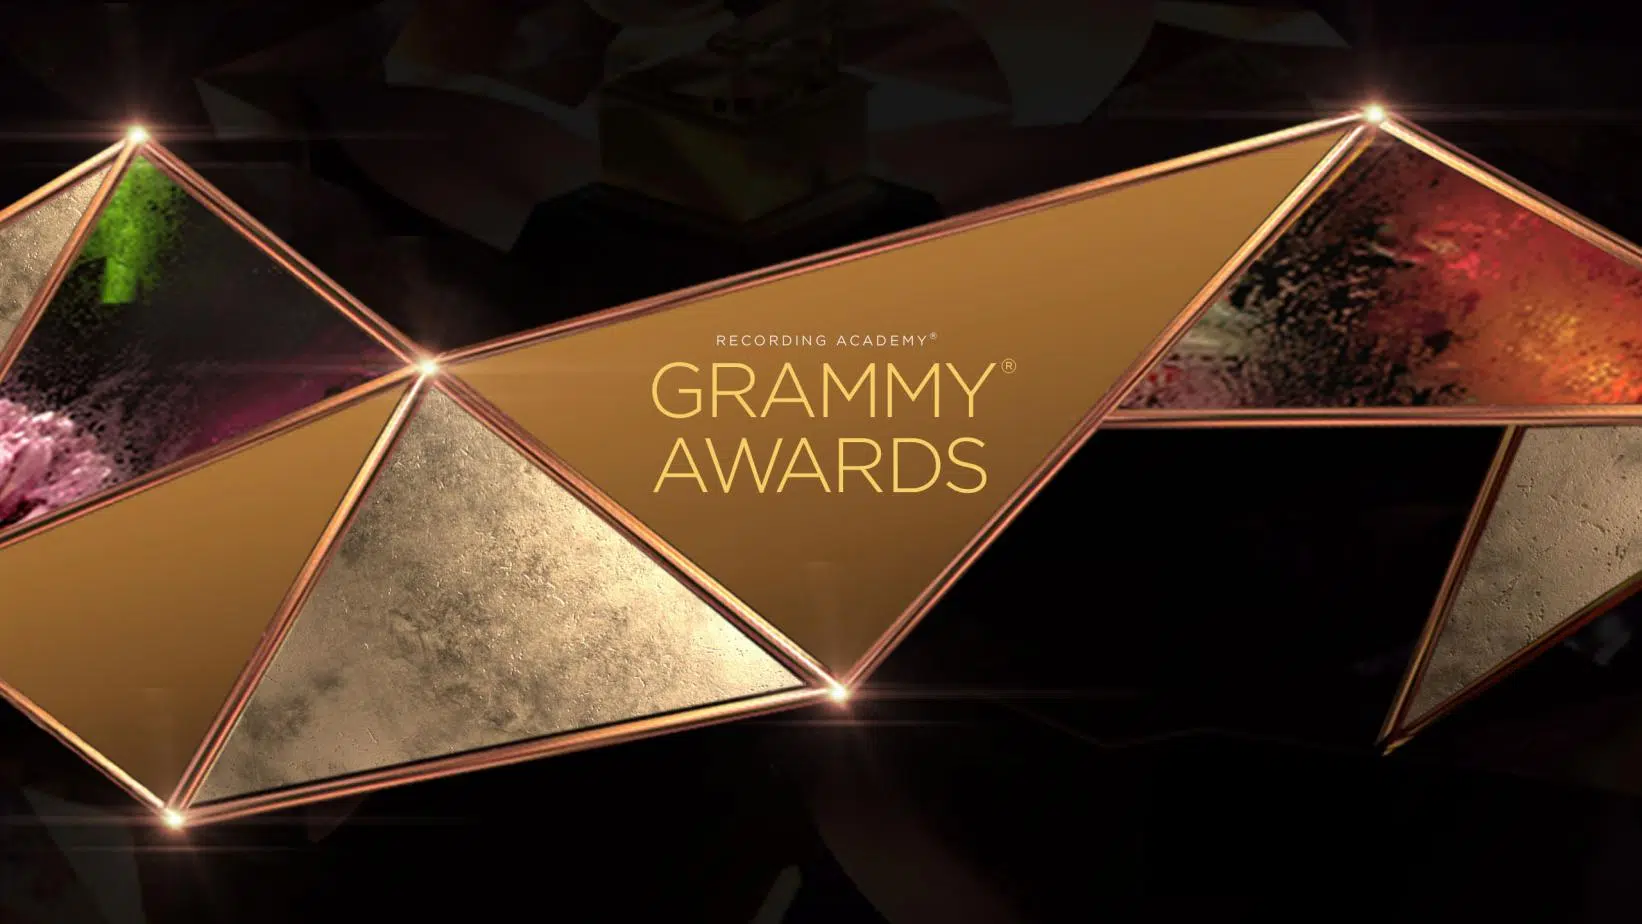 Grammys 2021 Early Ratings Revealed, Lowest Ranked Viewership in History in Early Numbers